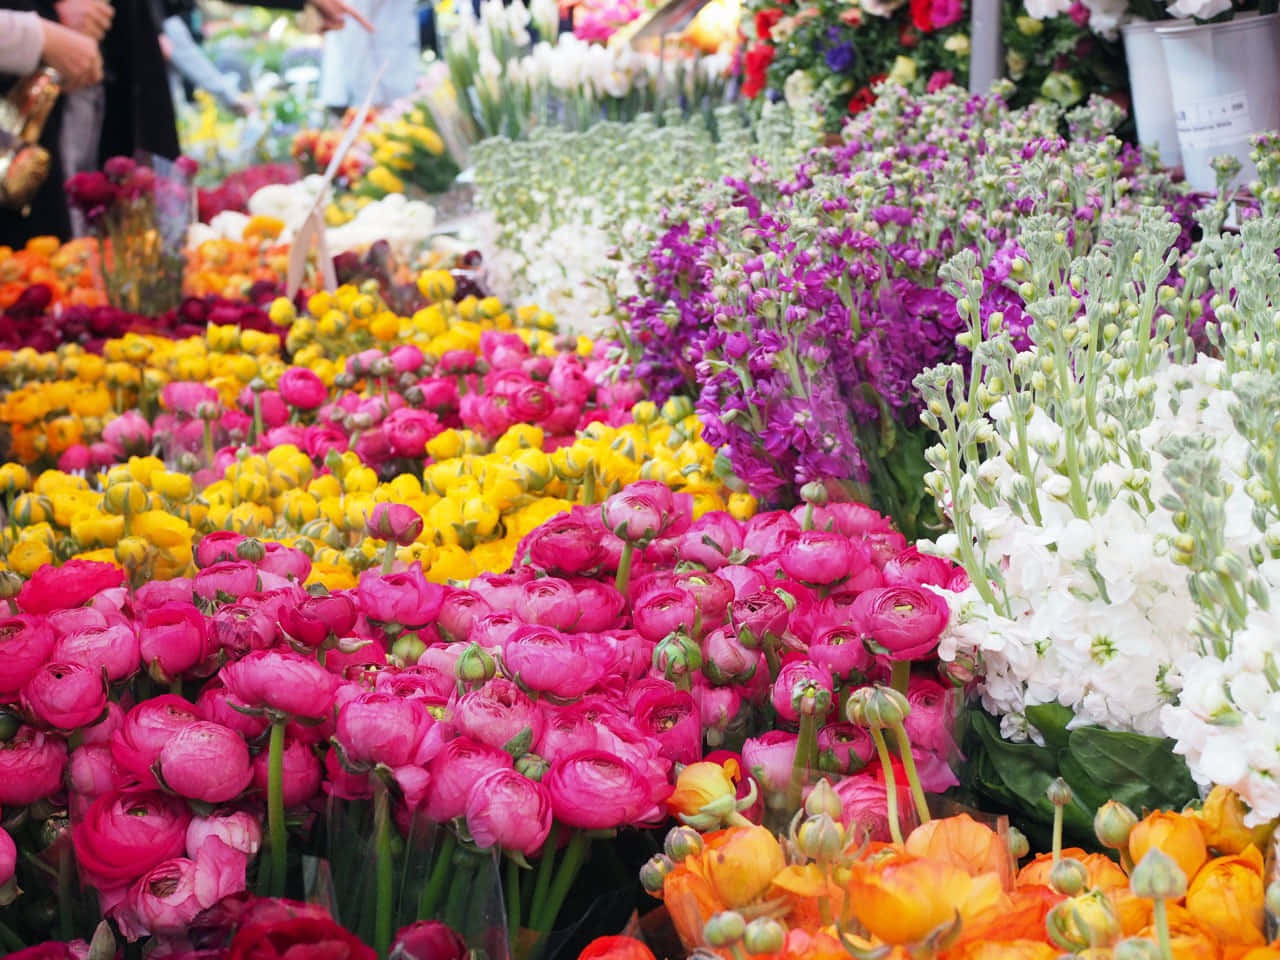 A vibrant and colorful flower market with a wide variety of flowers Wallpaper